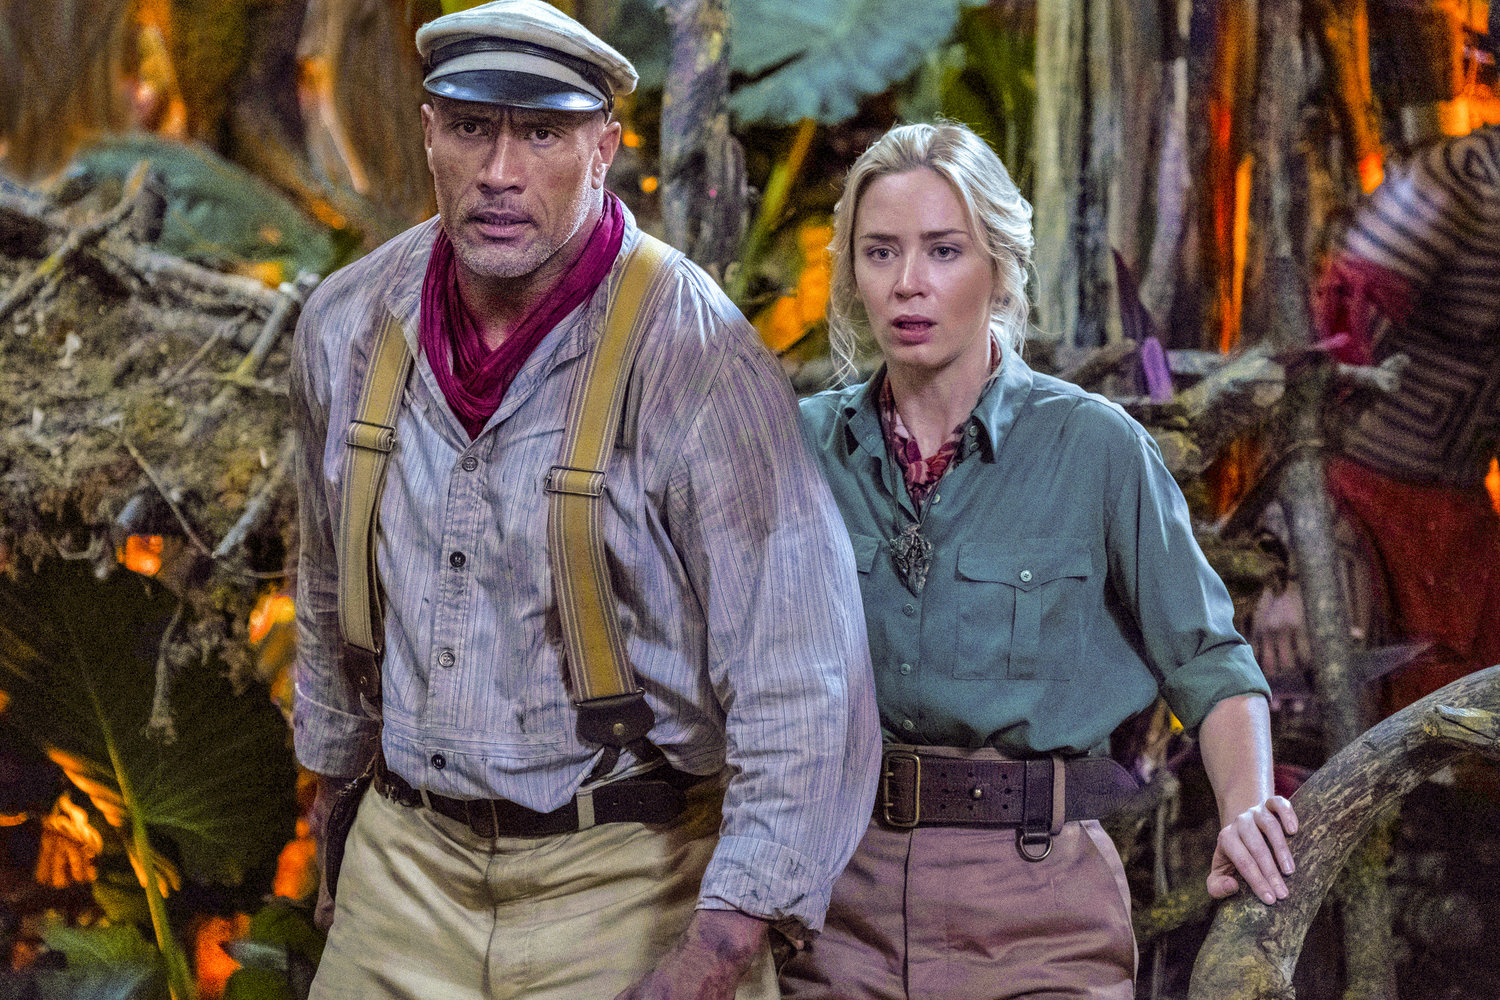 Family-friendly adventure — Dwayne Johnson as Frank Wolff and Emily Blunt as Lily Houghton in a scene from “Jungle Cruise.”